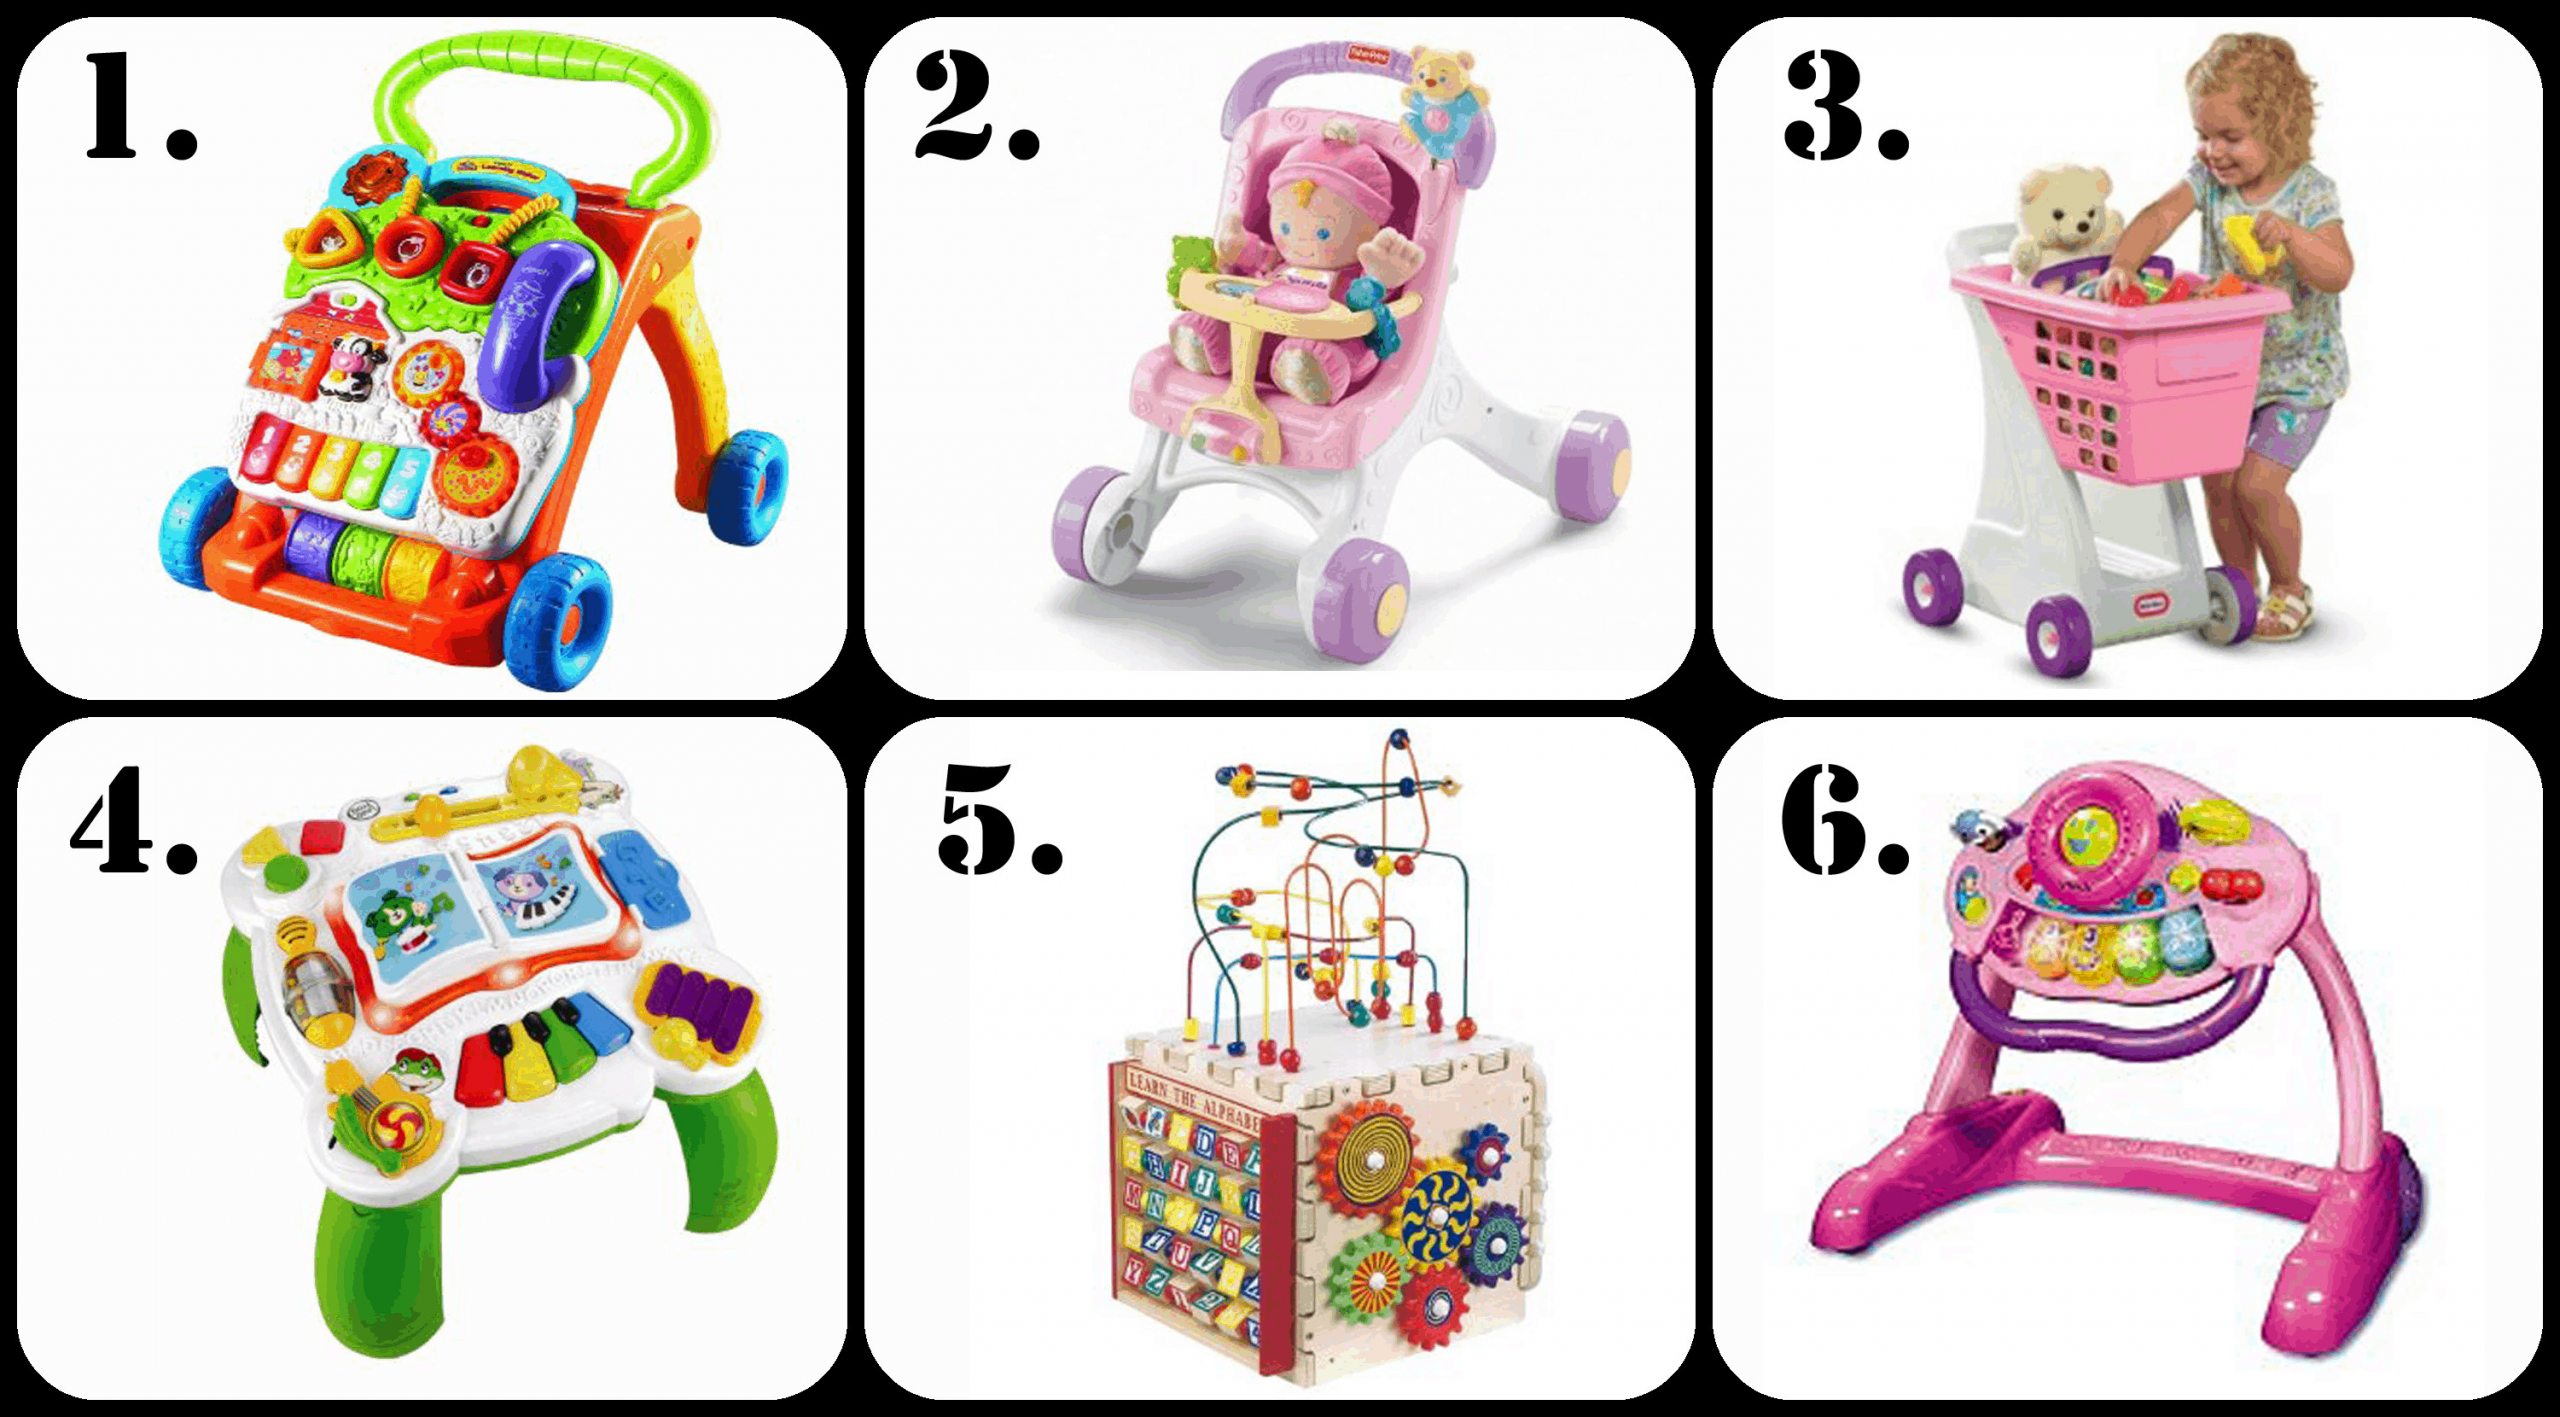 Best 1 Year Old Birthday Gift
 The Ultimate List of Gift Ideas for a 1 Year Old Girl